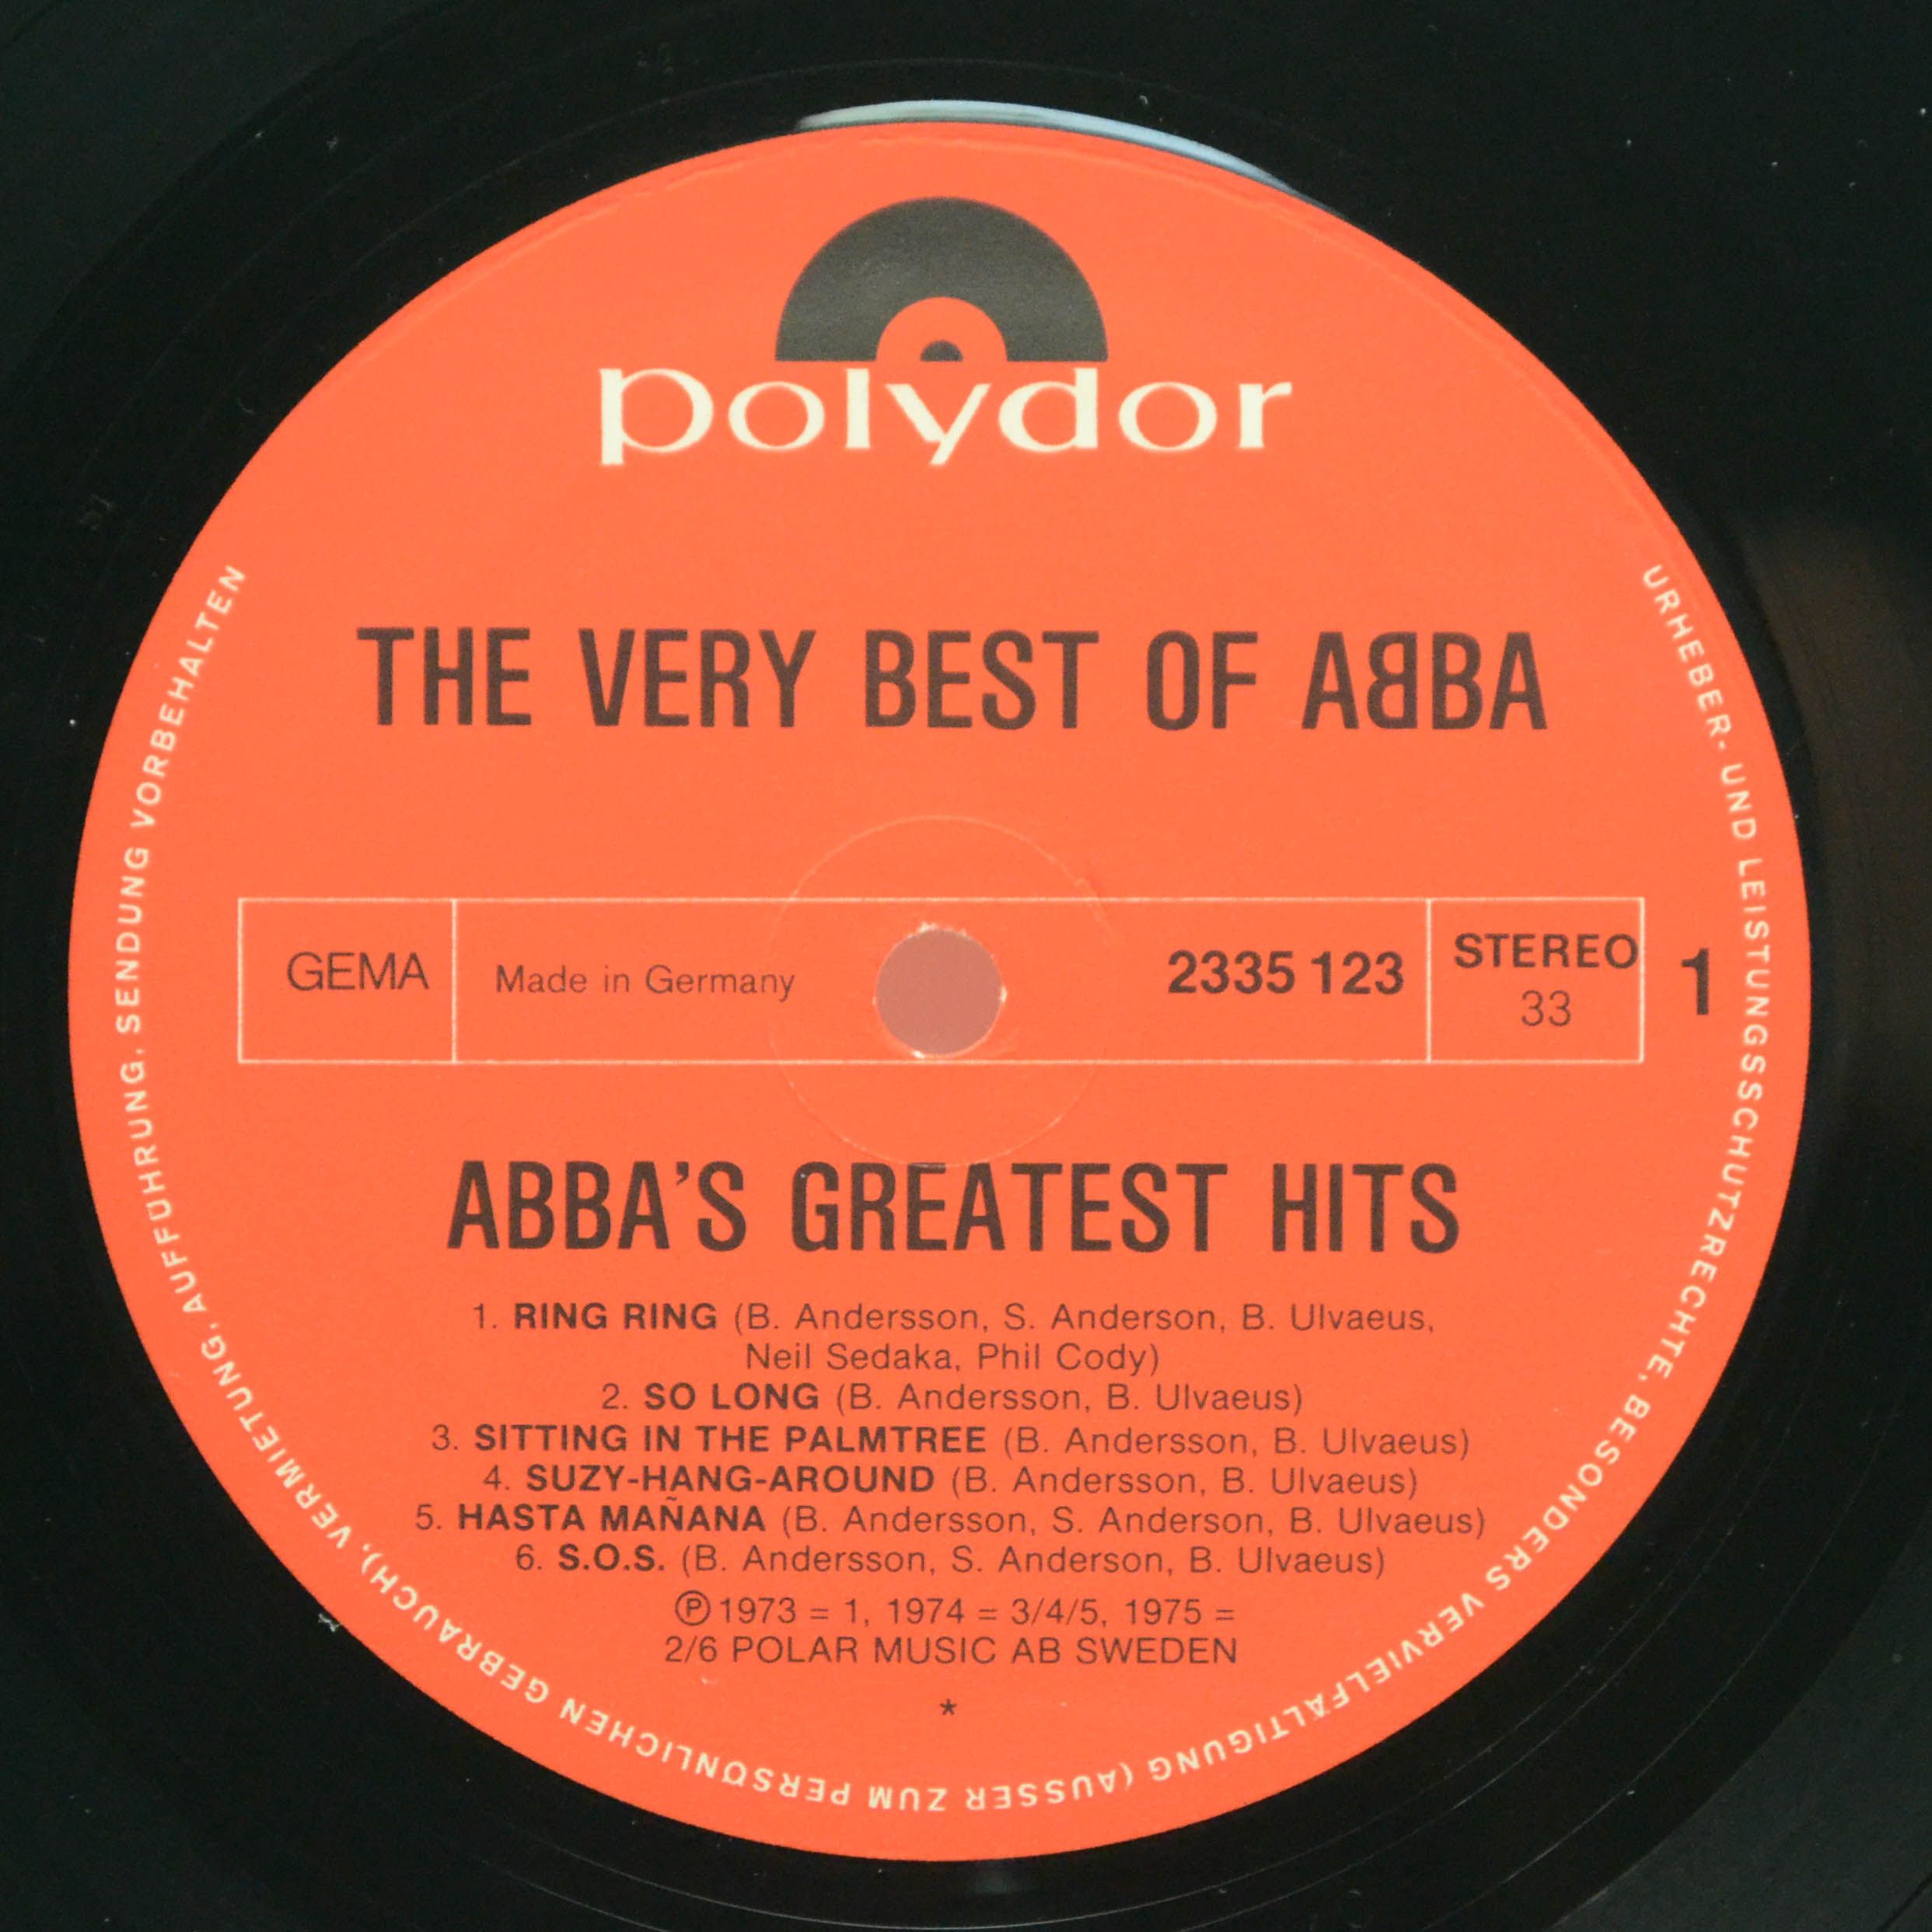 ABBA — The Very Best Of ABBA (ABBA's Greatest Hits) (2LP), 1976